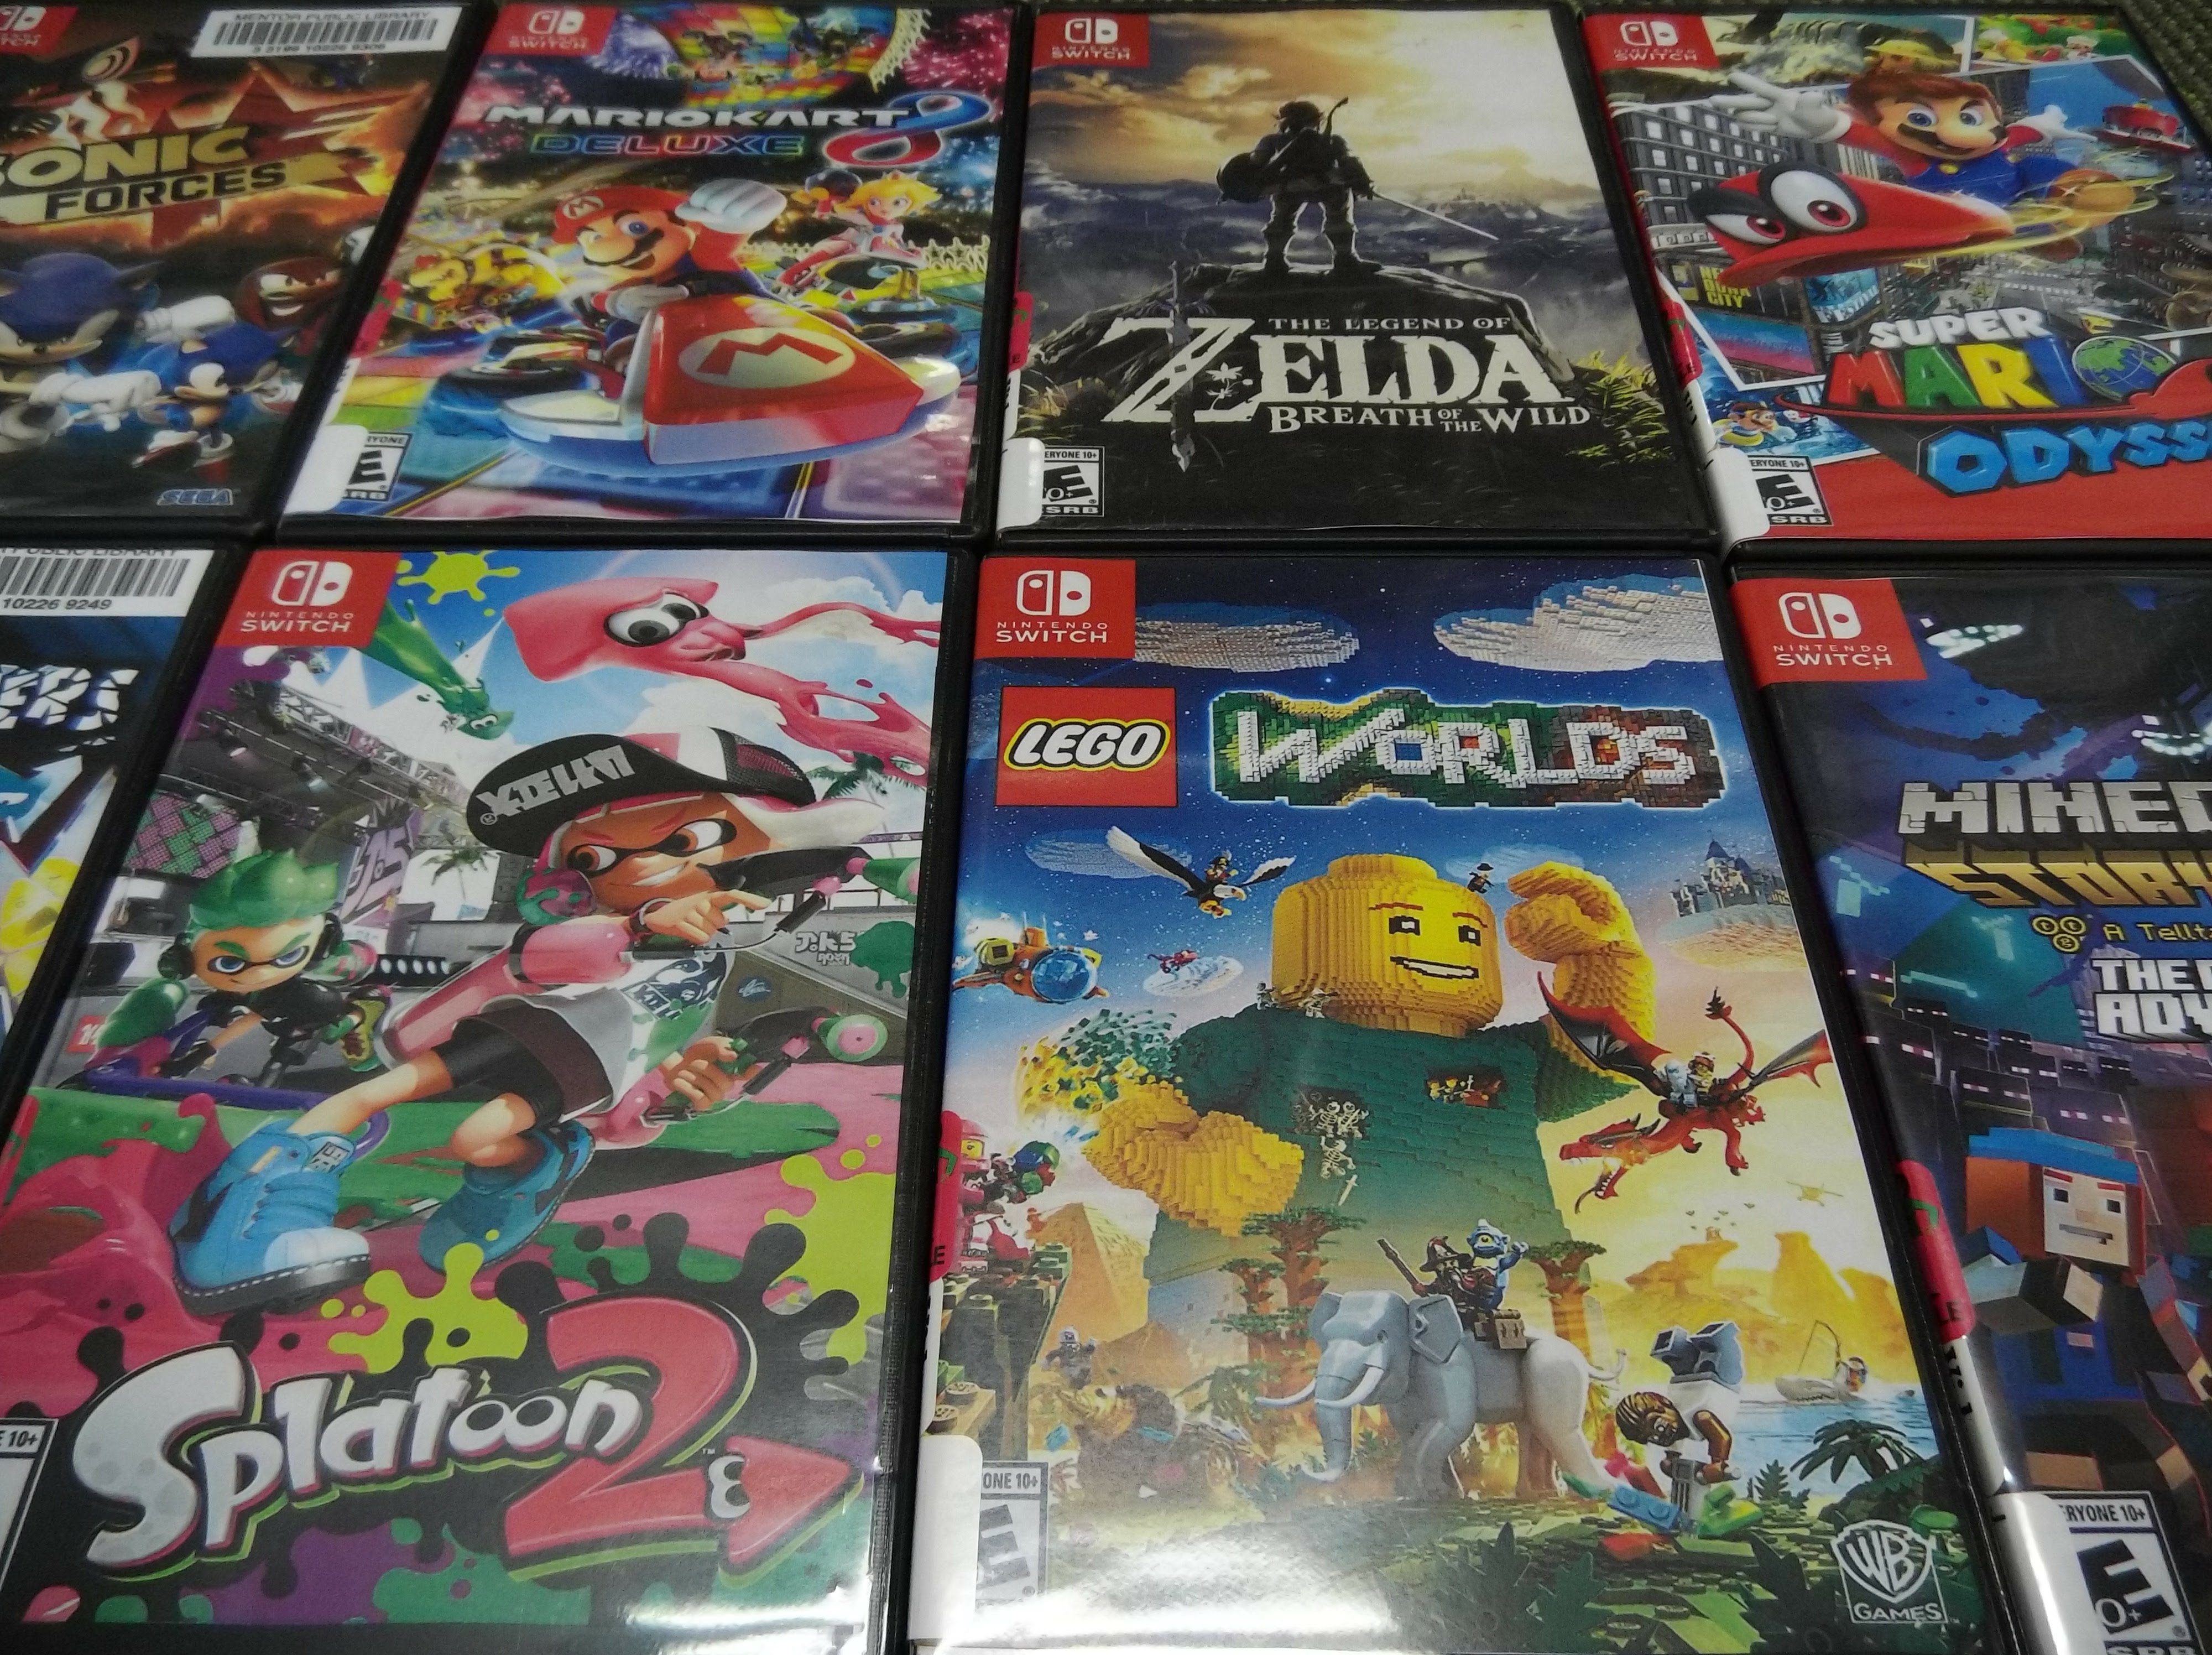 The Legend of Zelda: Breath of the Wild And Splatoon 2 Awarded At